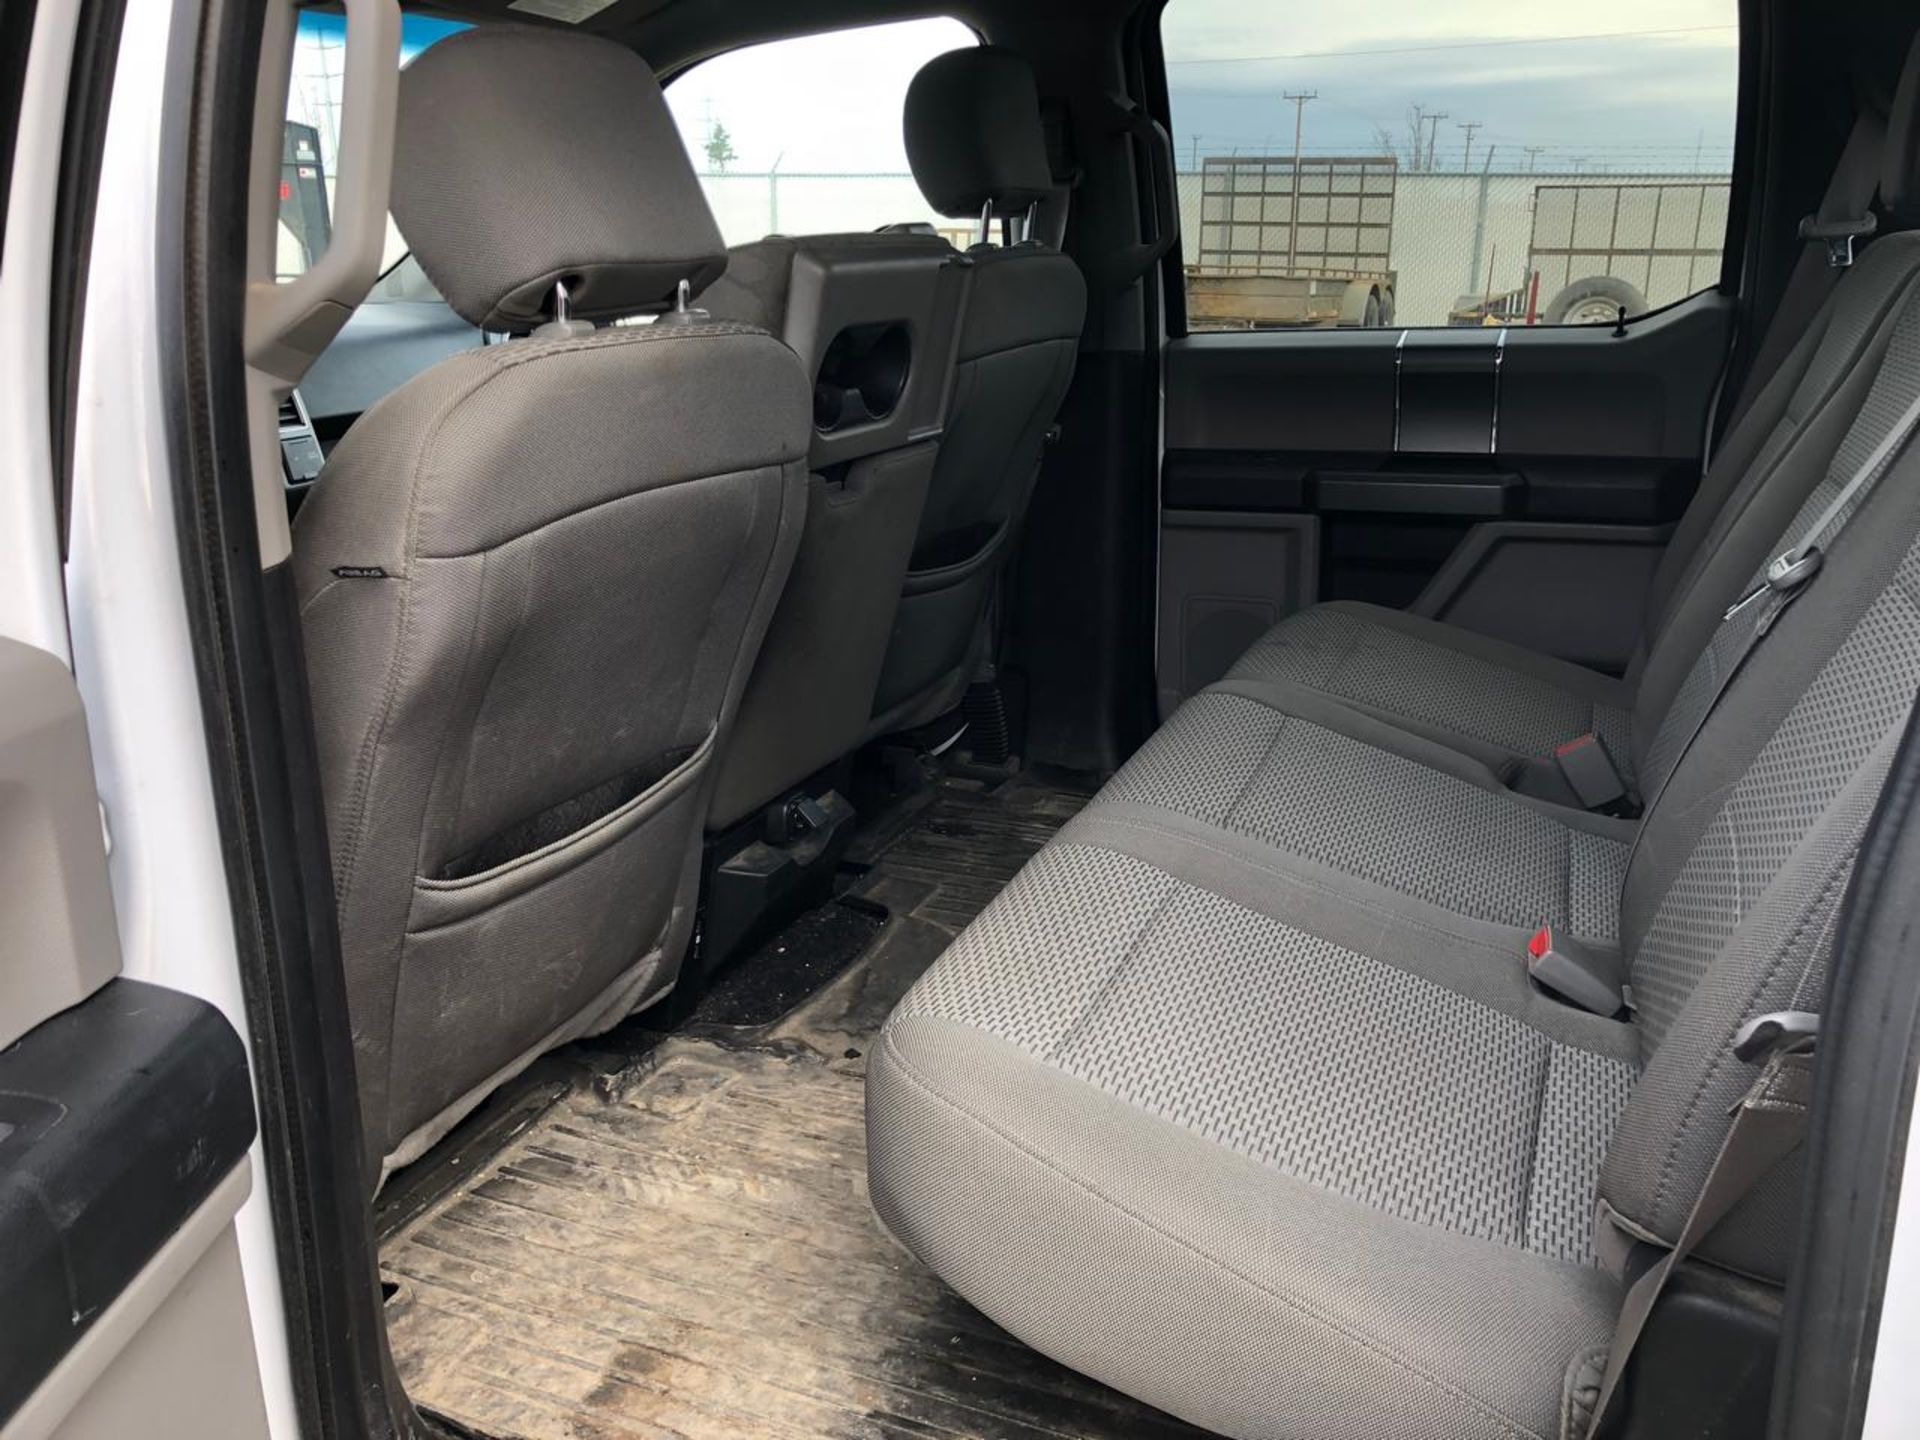 2018 Ford F150 Pick-up Truck - Image 12 of 13